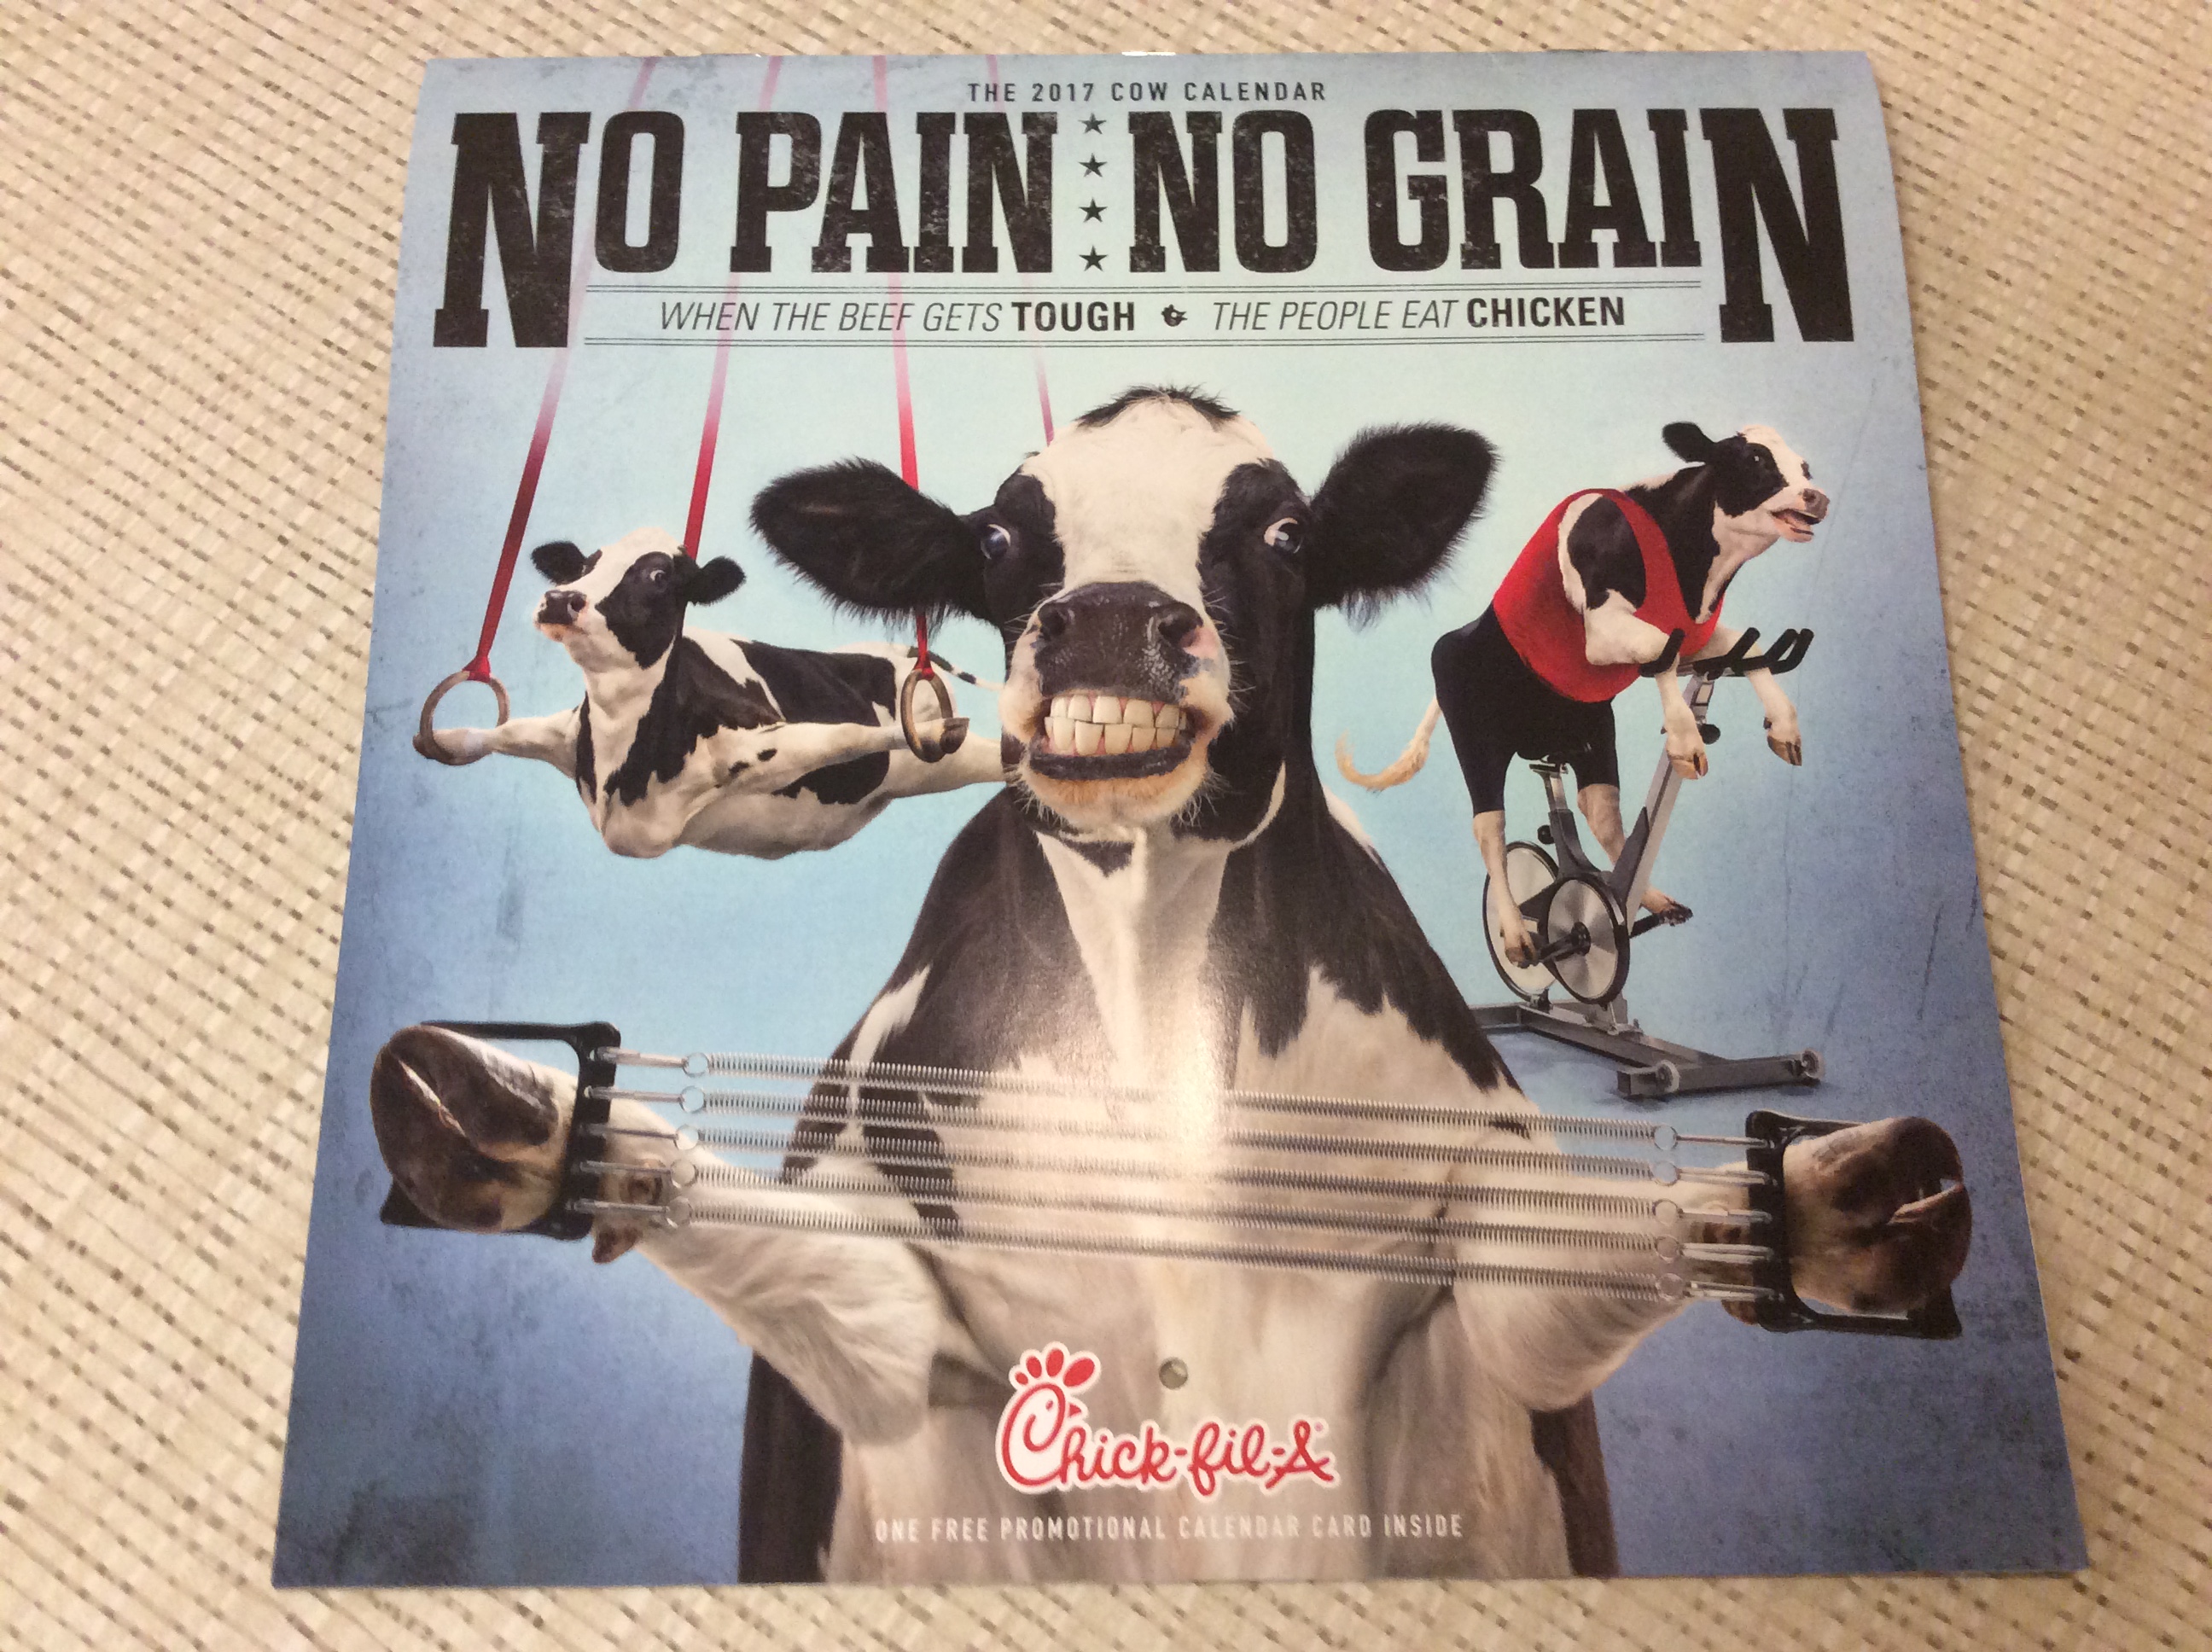 ChickFilA 2017 Calendar now Available for Purchase for Only 7